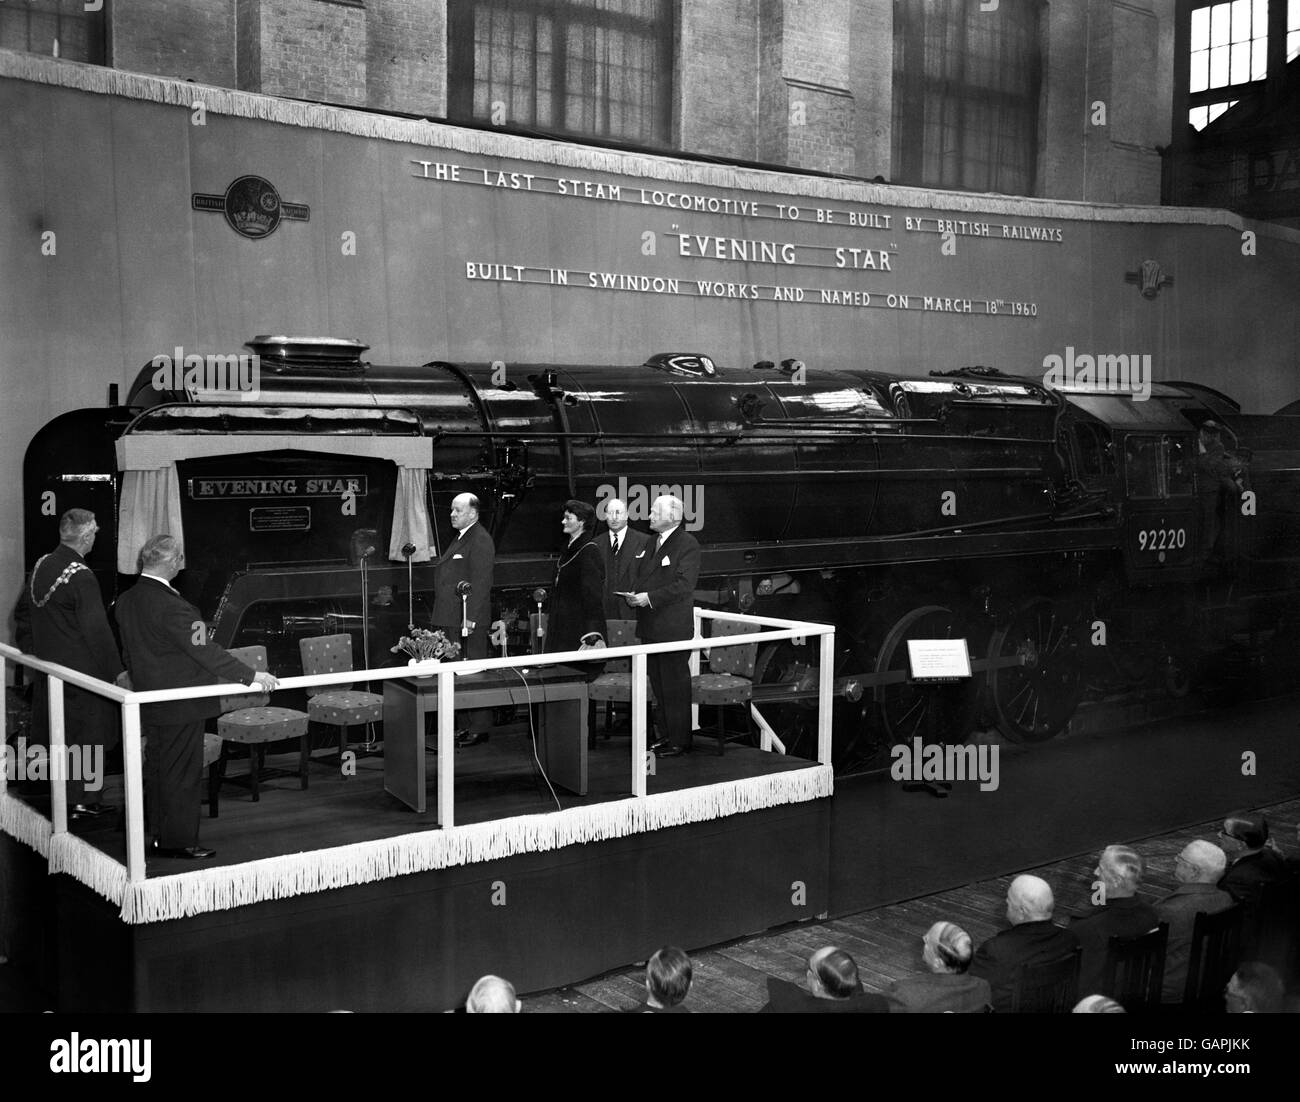 The scene inside Swindon Locomotive Works as MR K.W.C Grand, a member of the British Transport Commission unveiled the nameplate on the last steam locomotive to be built by British Railways. She was named 'Evening Star'. Stock Photo